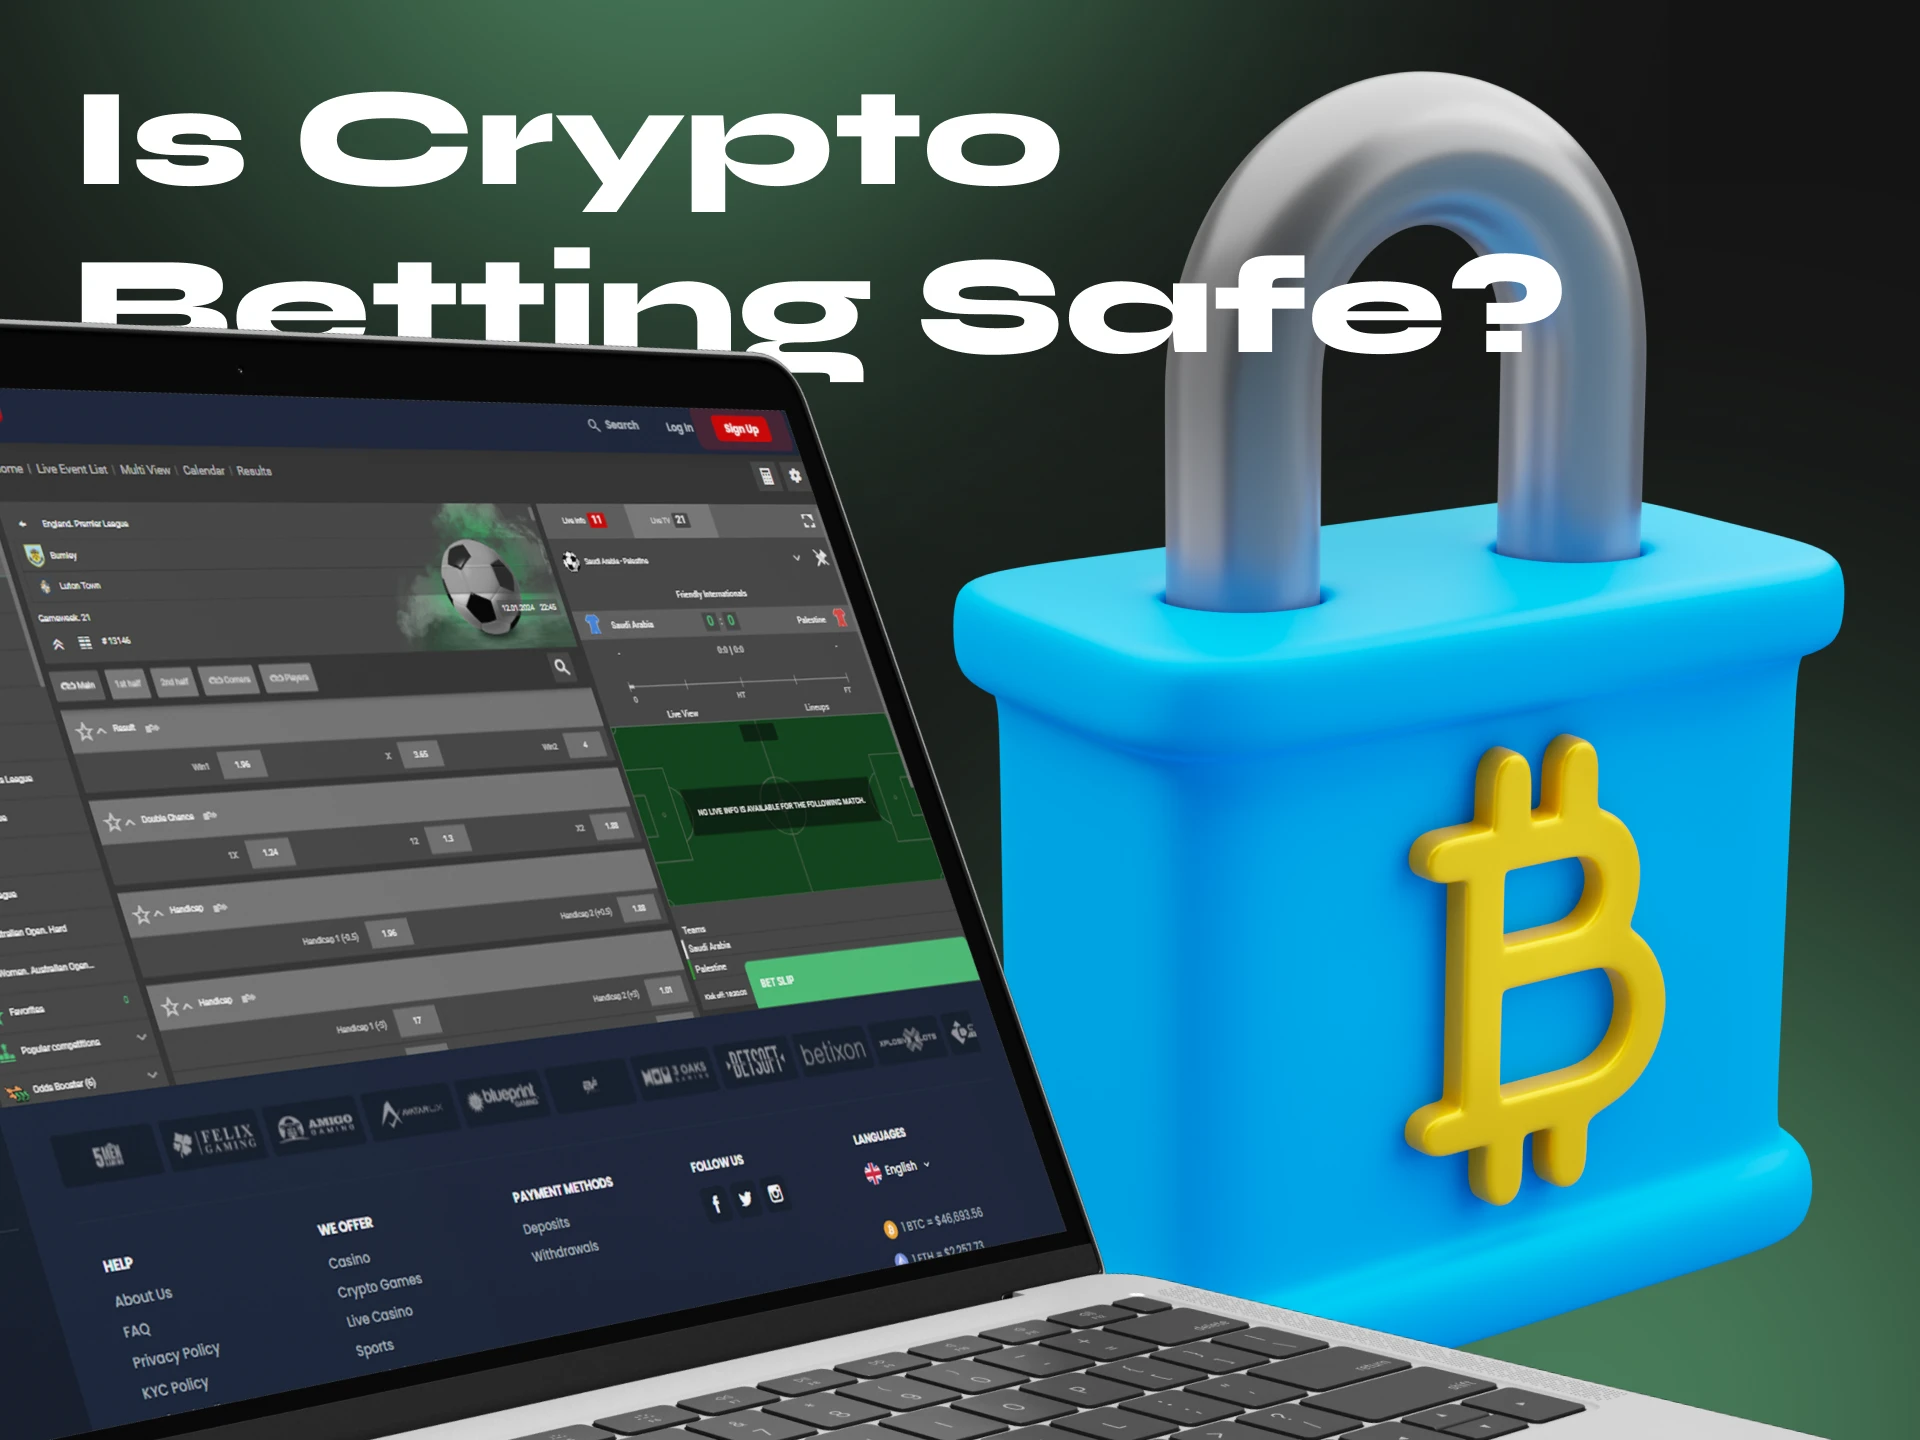 Don’t worry about the security of your personal data, betting with cryptocurrency is absolutely safe.